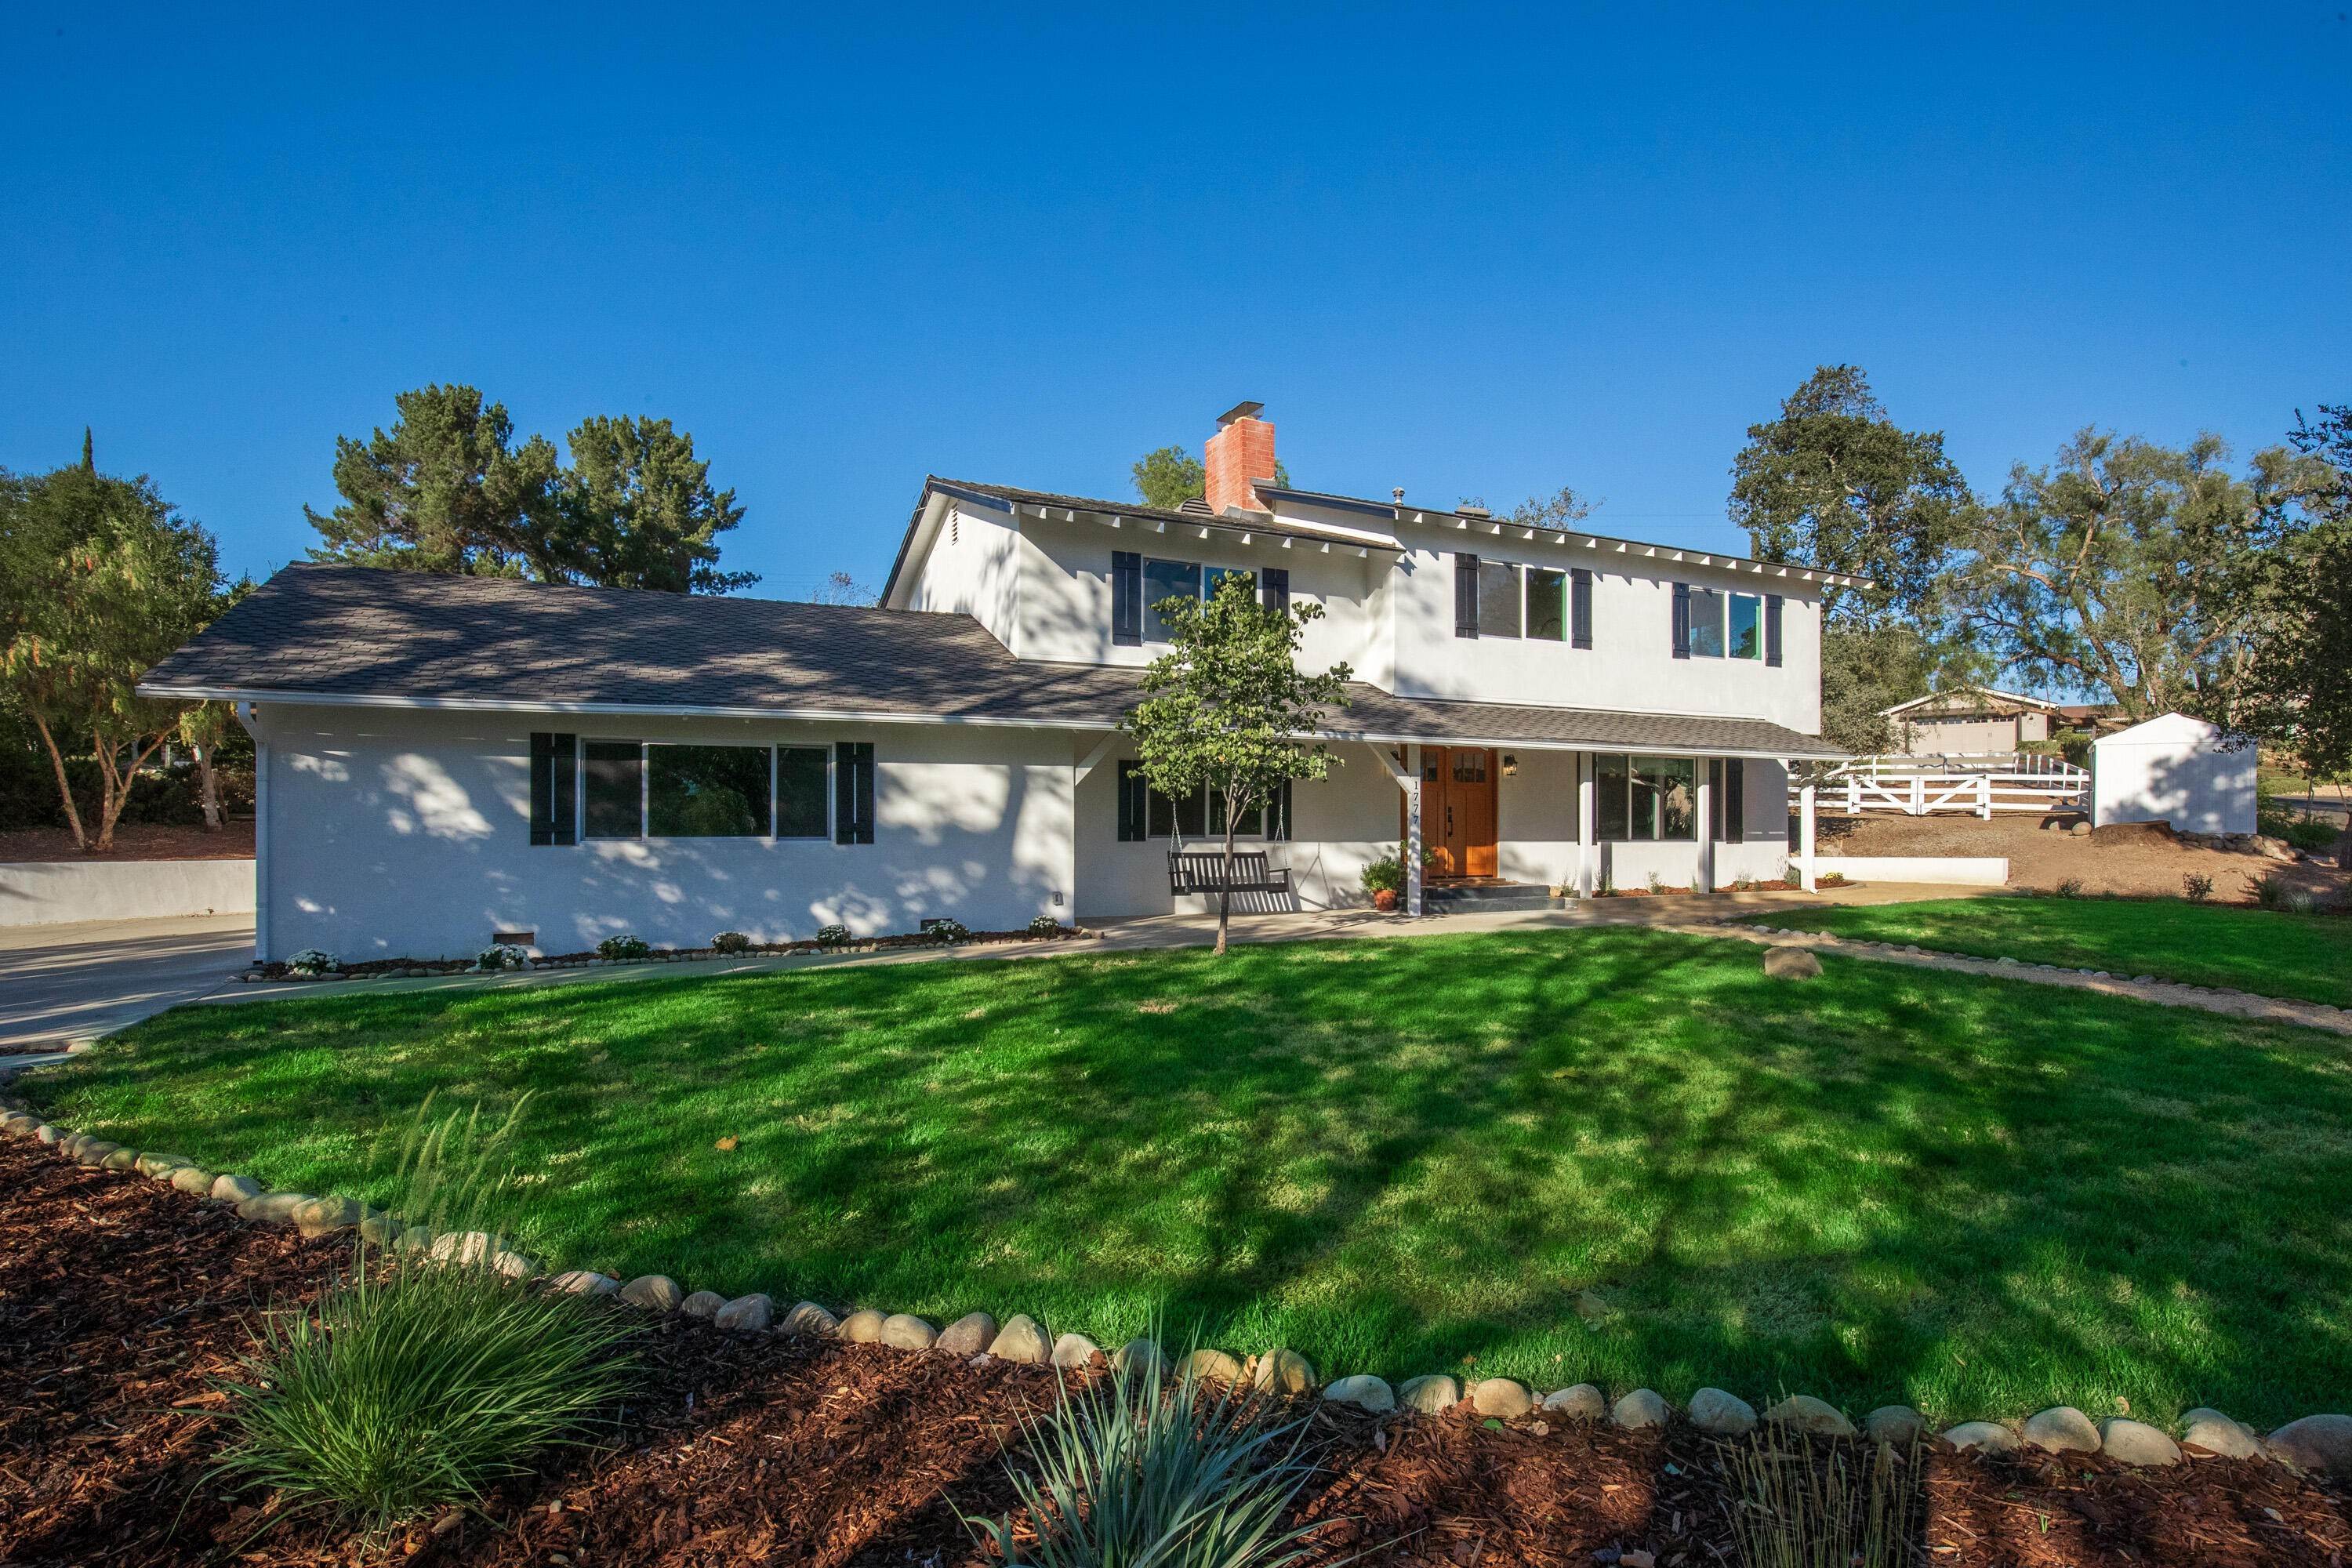 2. Estate for Sale at 1777 Eucalyptus Drive Solvang, California 93463 United States